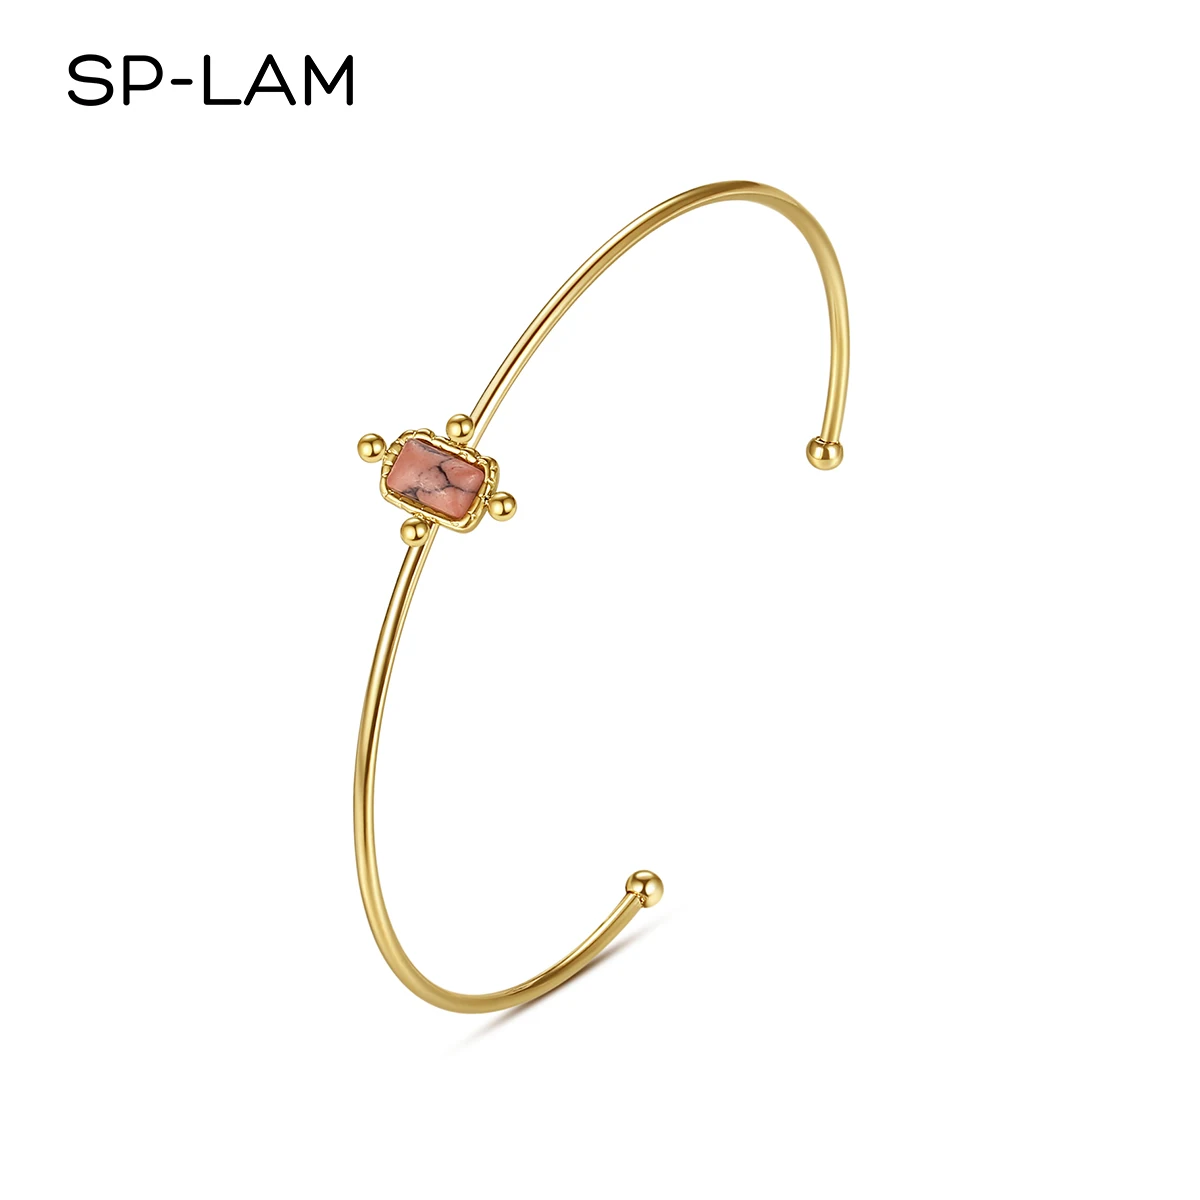 

SP-LAM Woman Stainless Steel Jewelry Bracelet Girl Designer Charm High Quality Gold Cuff Bangle